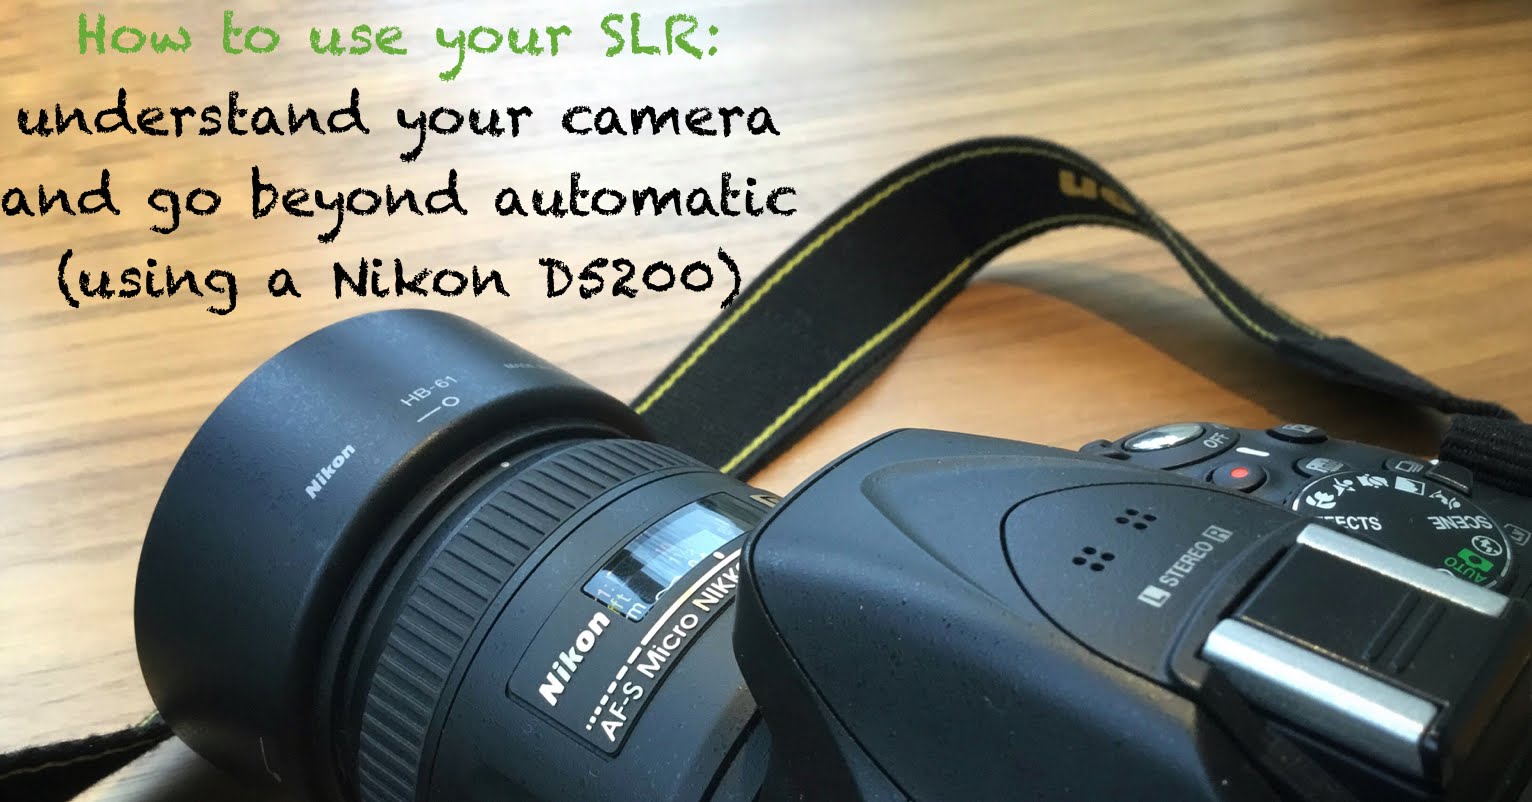 How to use your SLR: understand your camera and go beyond automatic  (using a Nikon D5200)